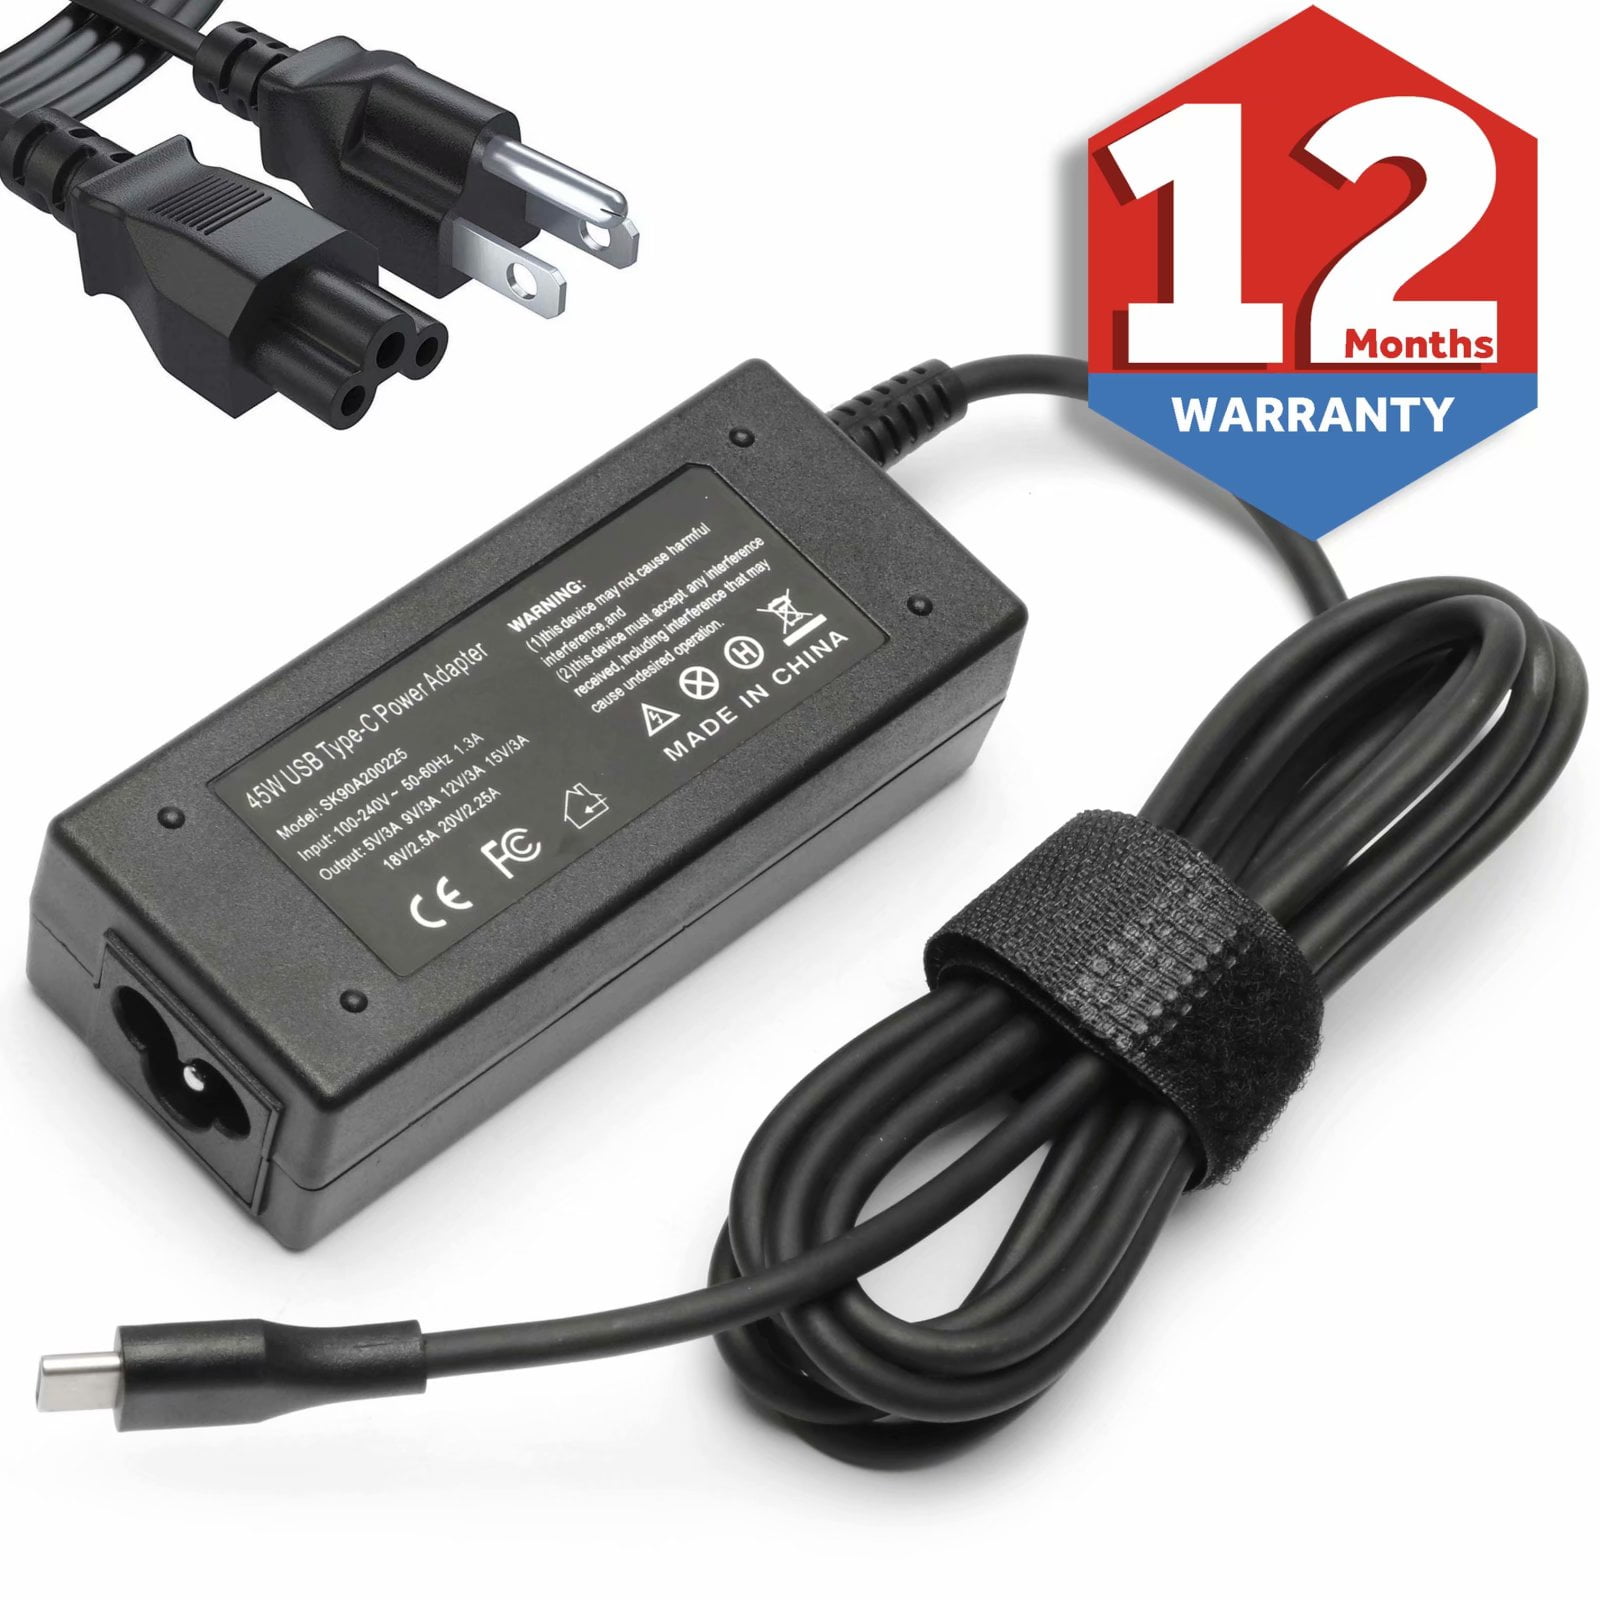 45W AC Charger Power Supply Adapter Cord For Lenovo Yoga 910 910-13 910-13IKB 